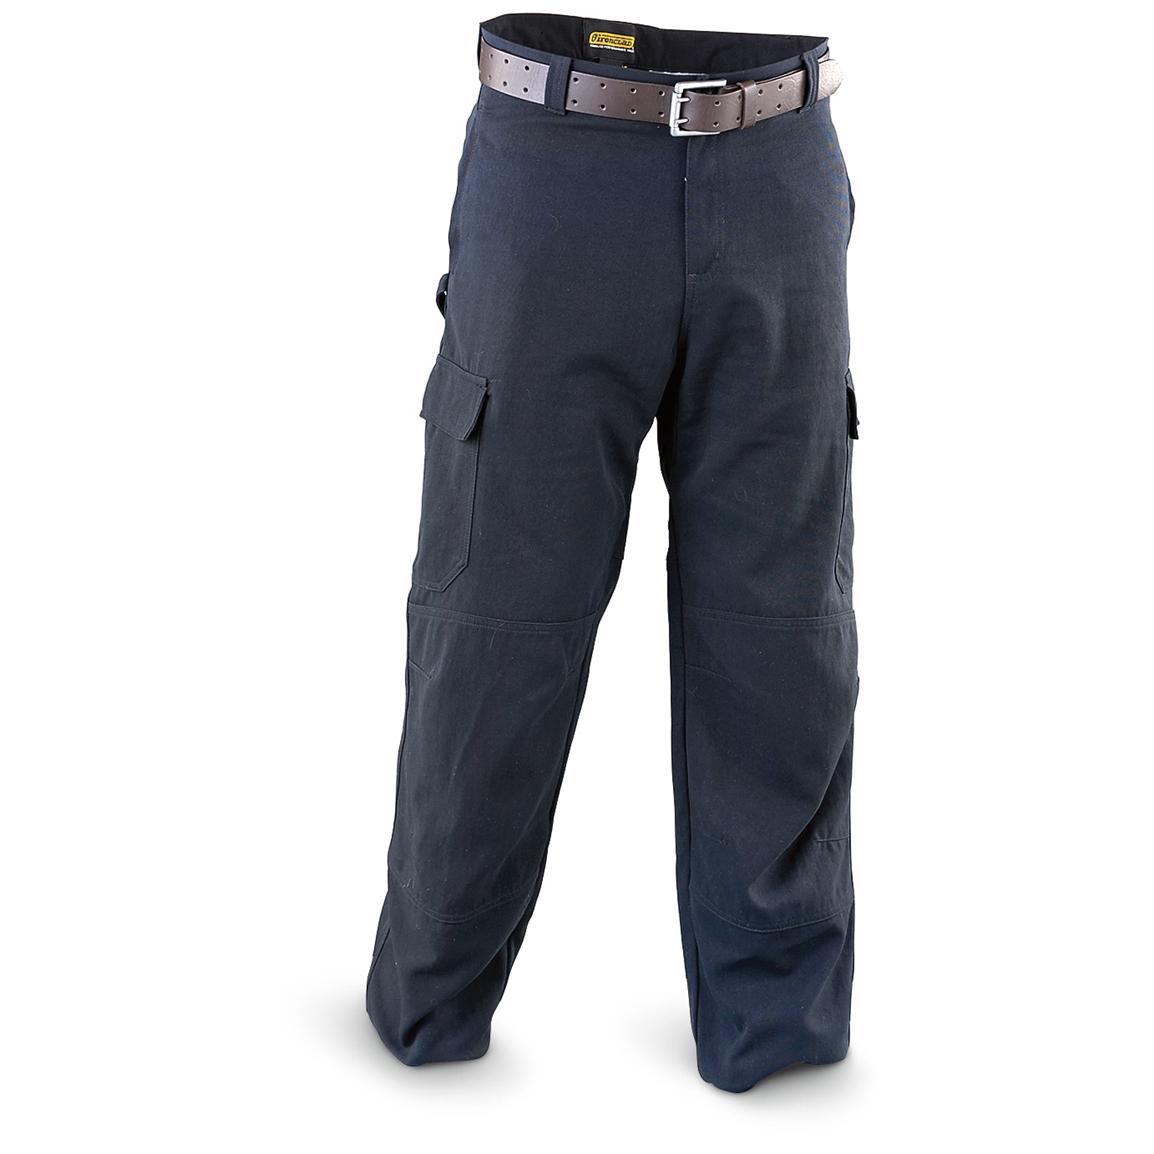 Ironclad® Work Pants - 232505, Jeans & Pants at Sportsman's Guide